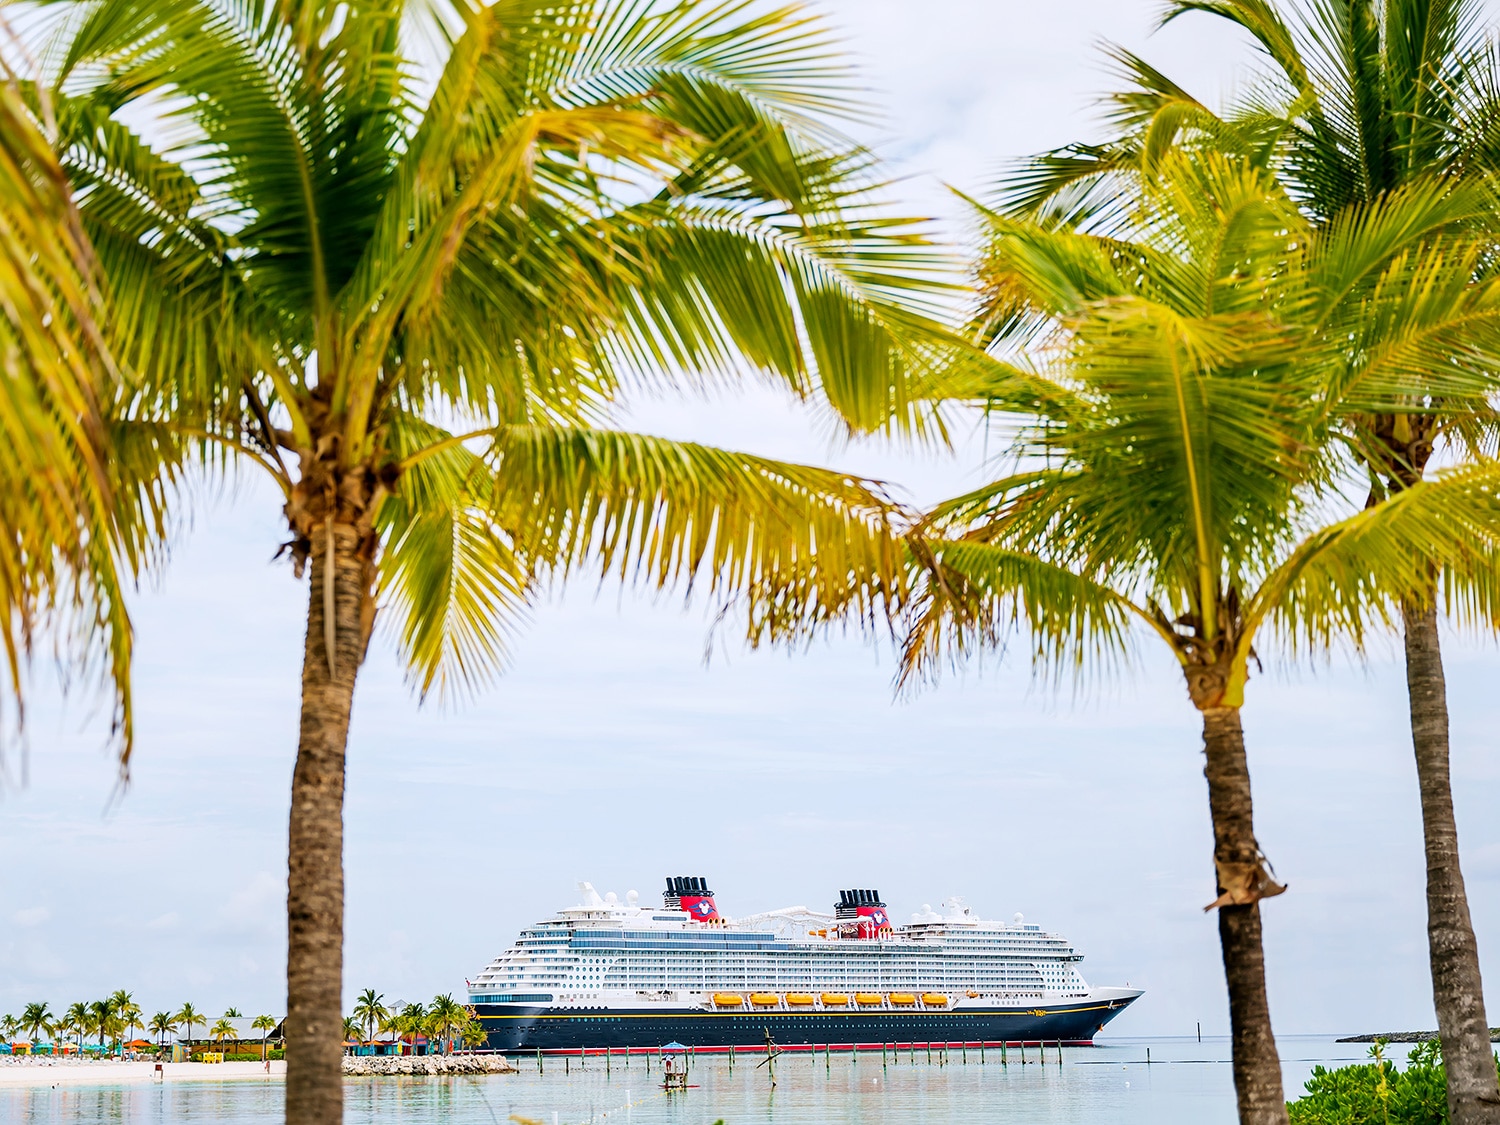 Disney Wish Tips: Things to know before you sail on Disney Cruise Line